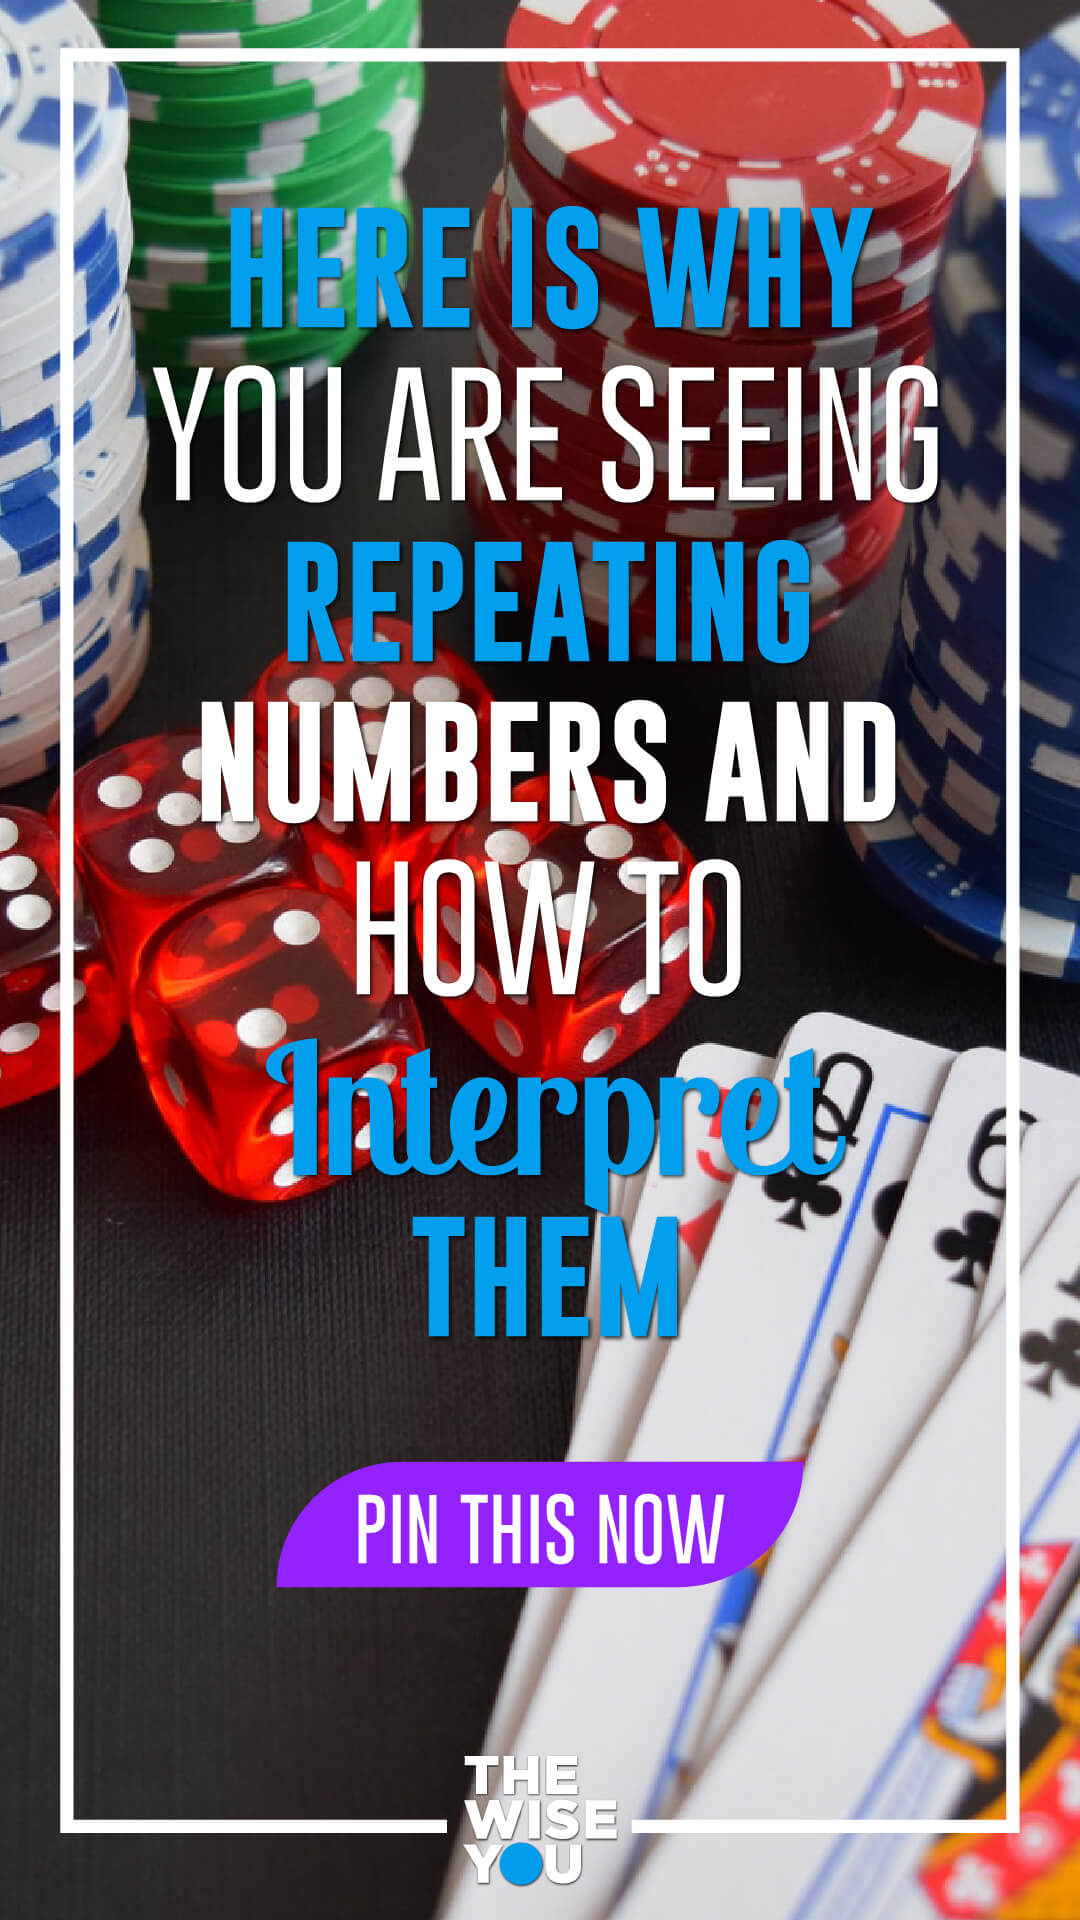 Here is Why You are Seeing Repeating Numbers and How to Interpret Them